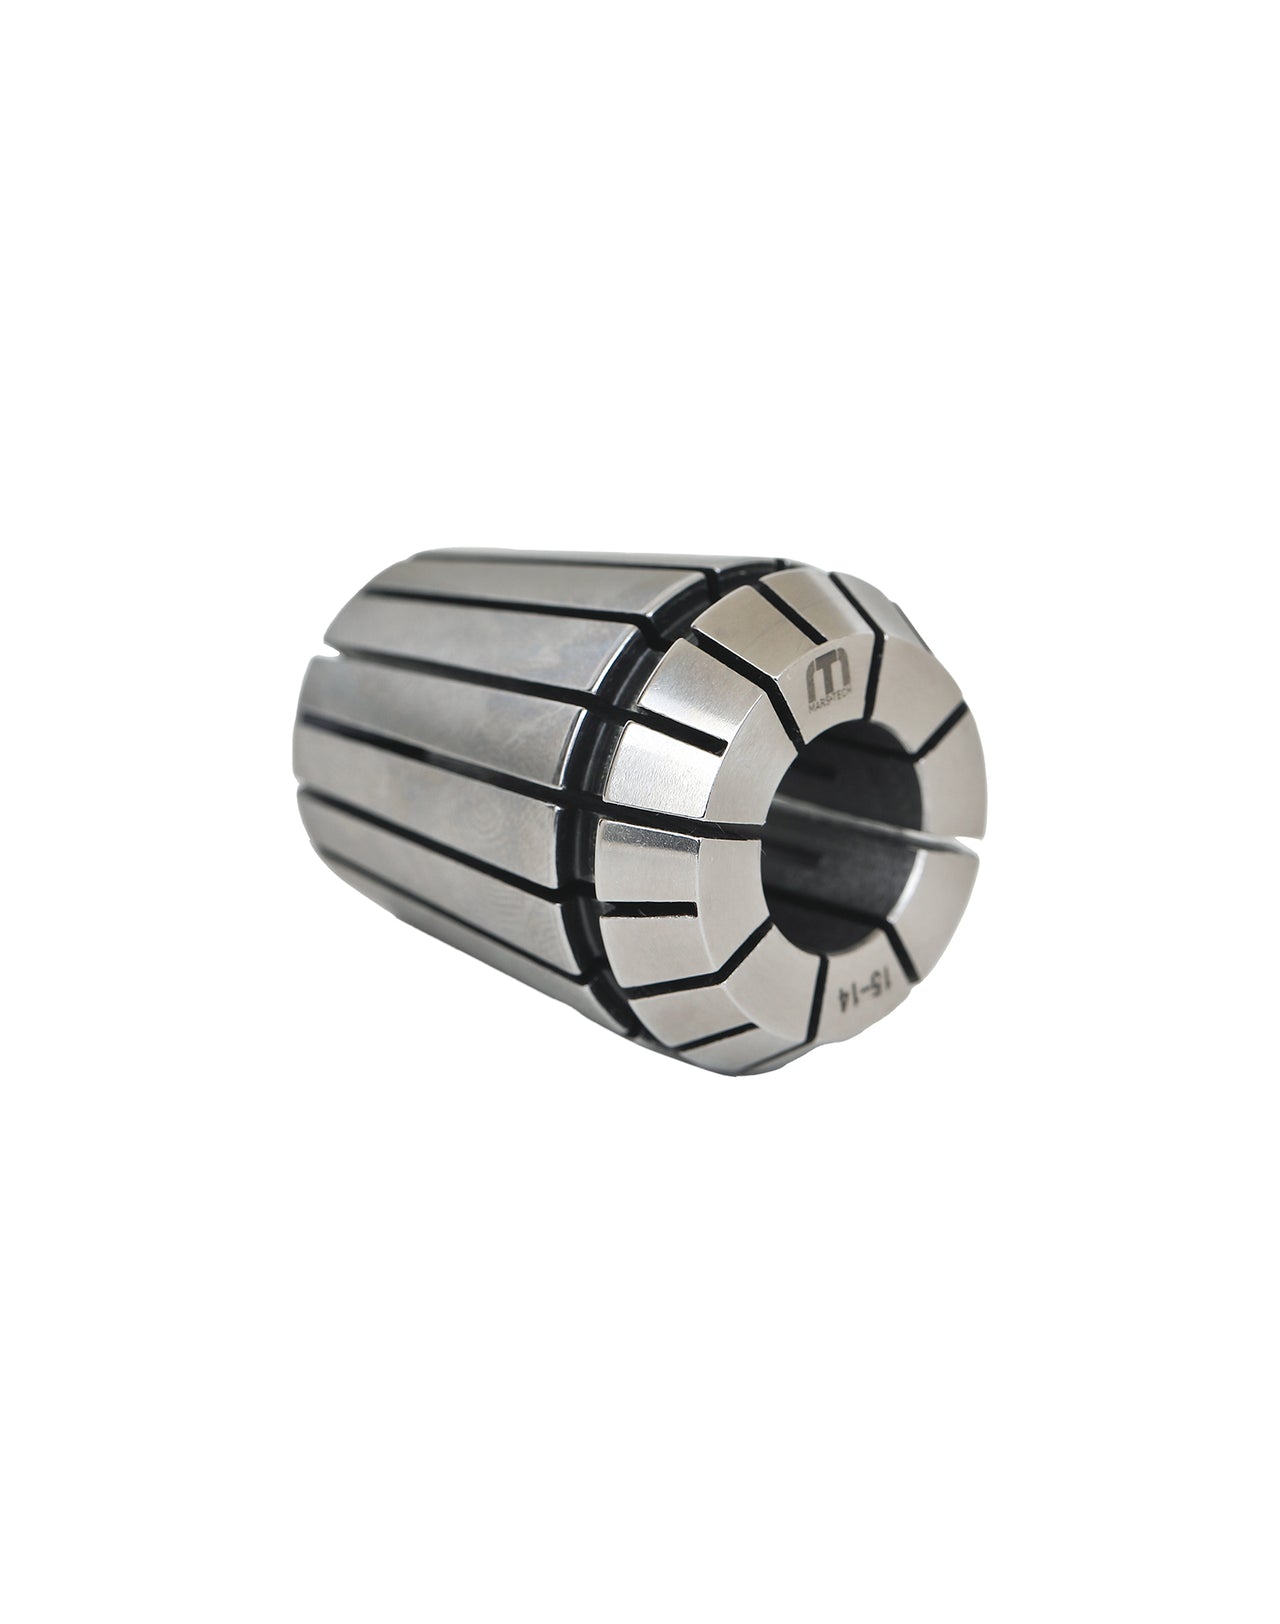 ER8 Ccollet  DIN6499B AA 0.005 Ultra high precision Quality Collet.